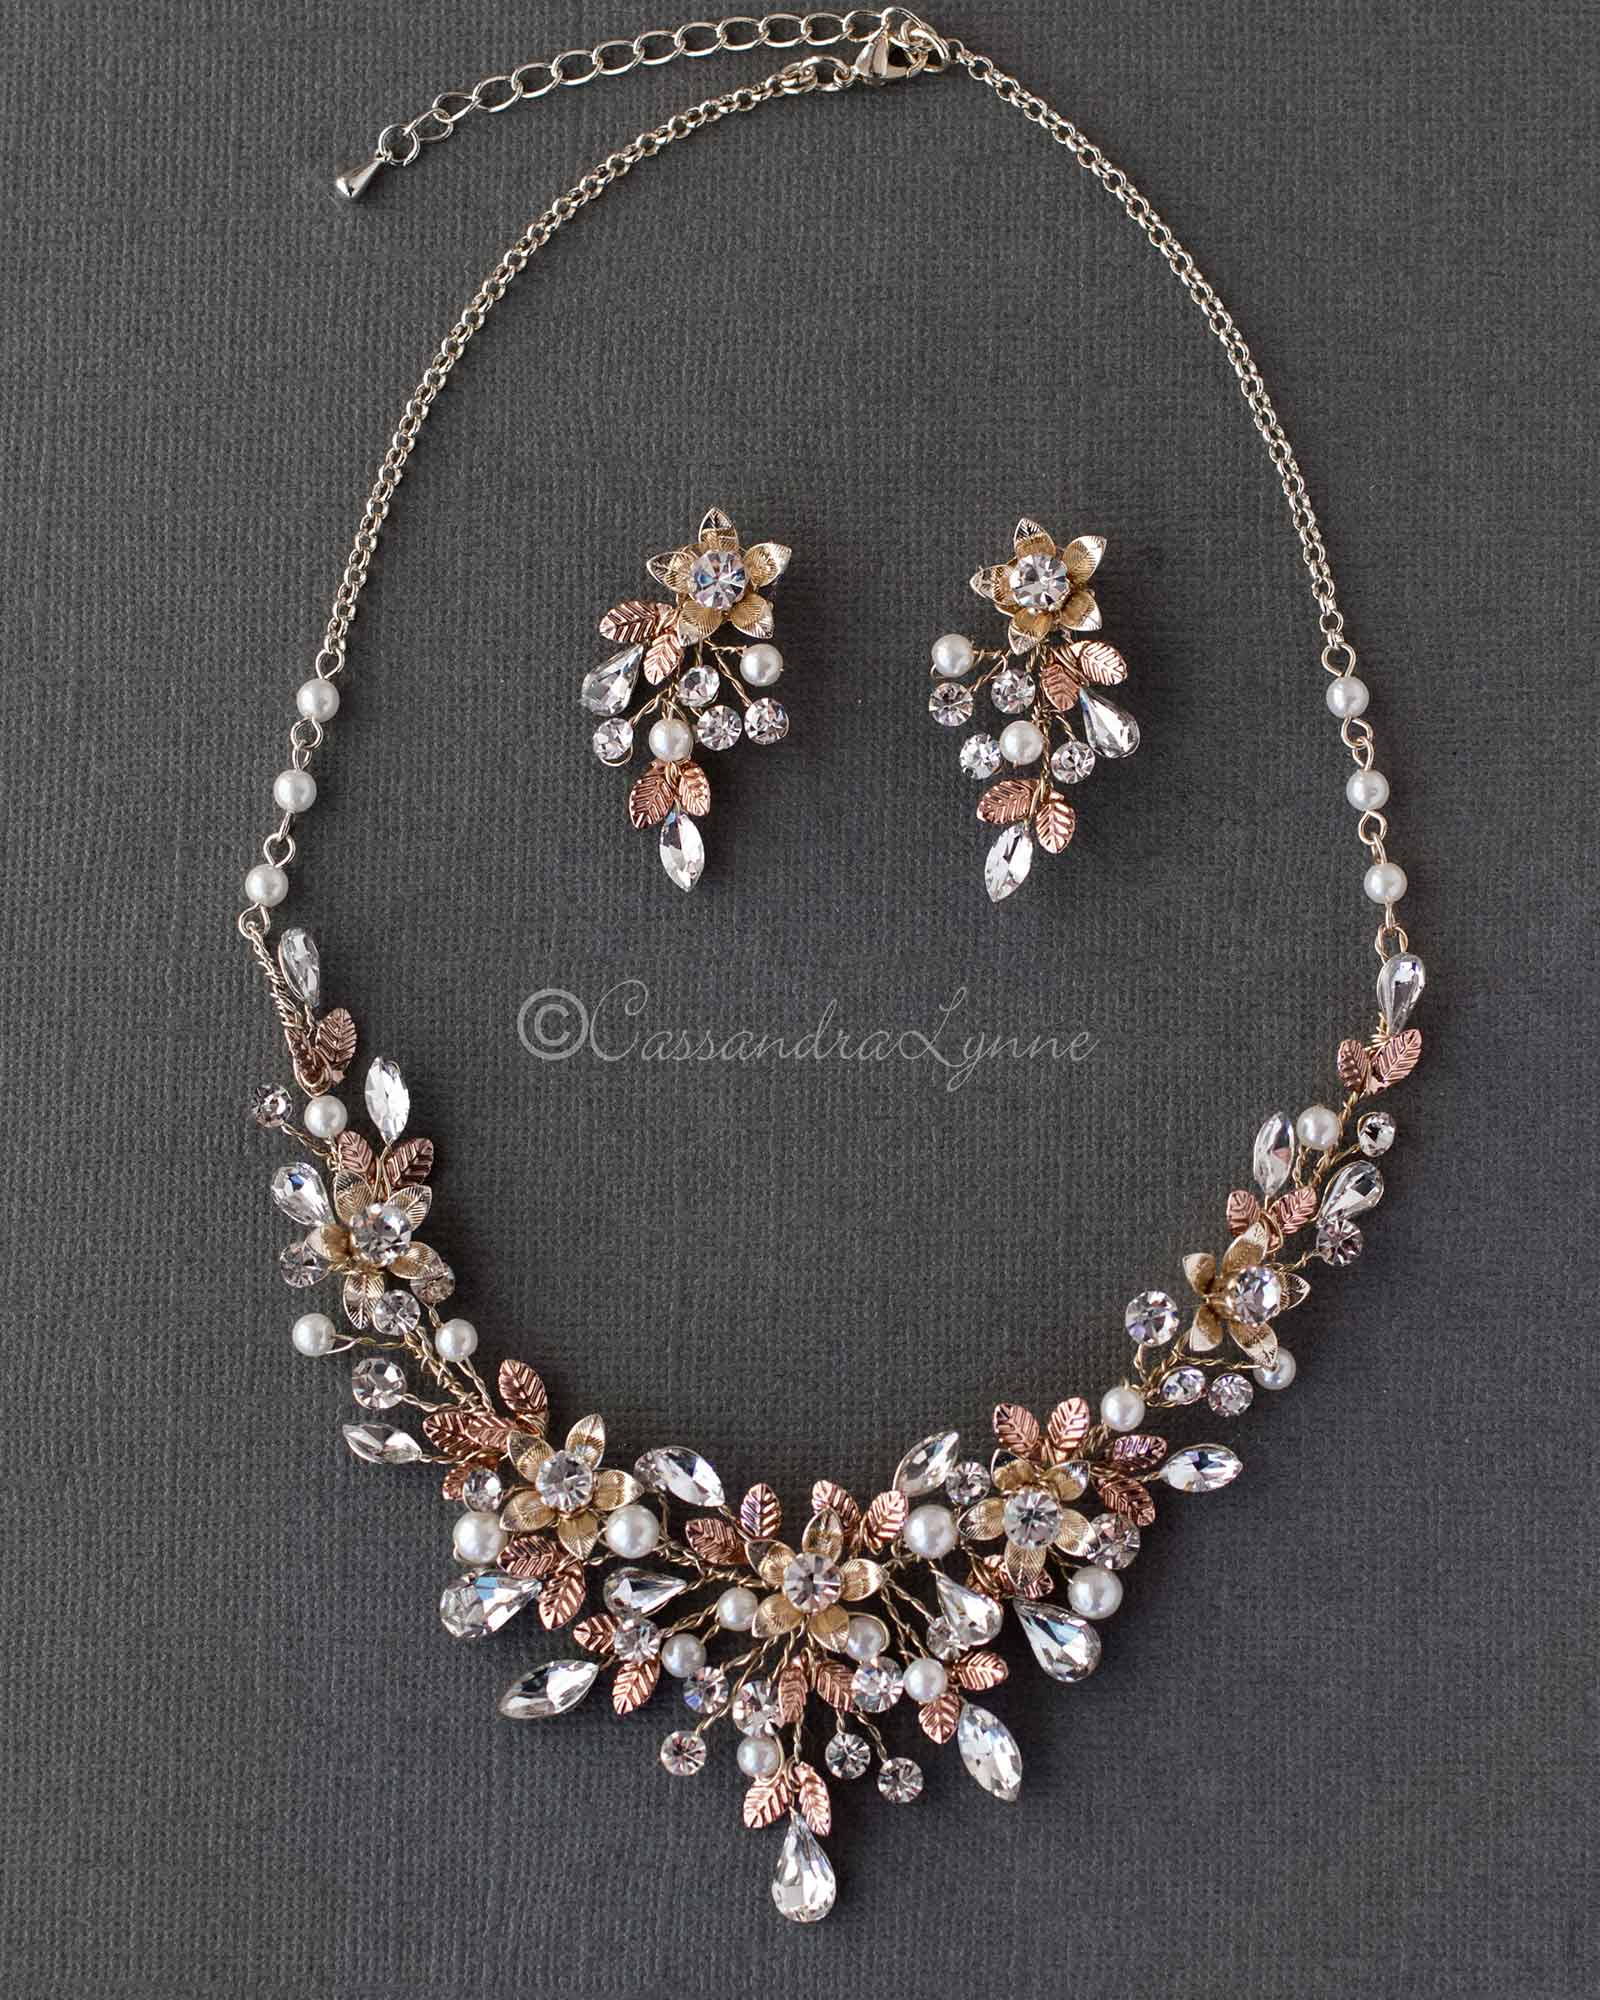 Two Tone Rose Gold Necklace and Earring Set - Cassandra Lynne